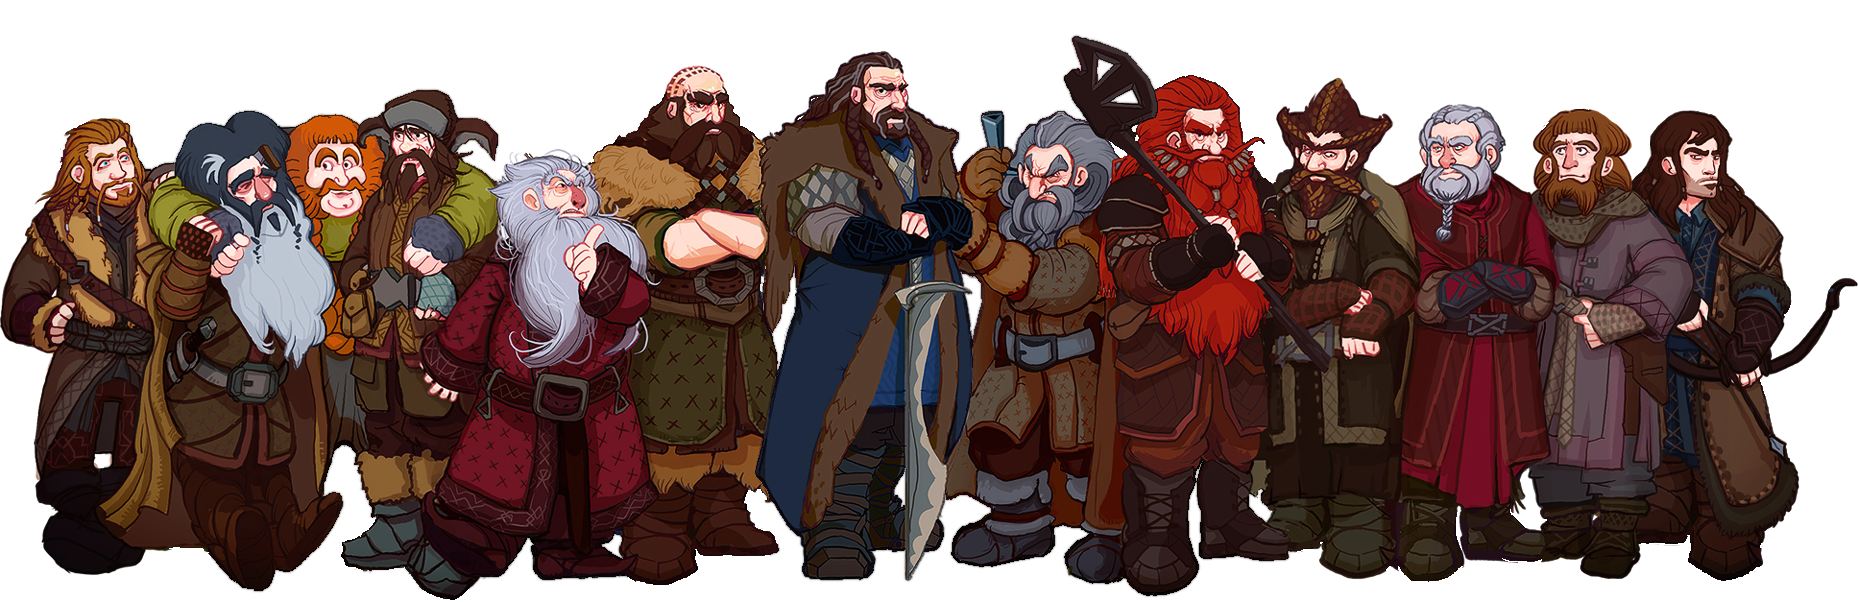 the_hobbit__thorin_and_company_by_art_calavera-d5nay7b.png